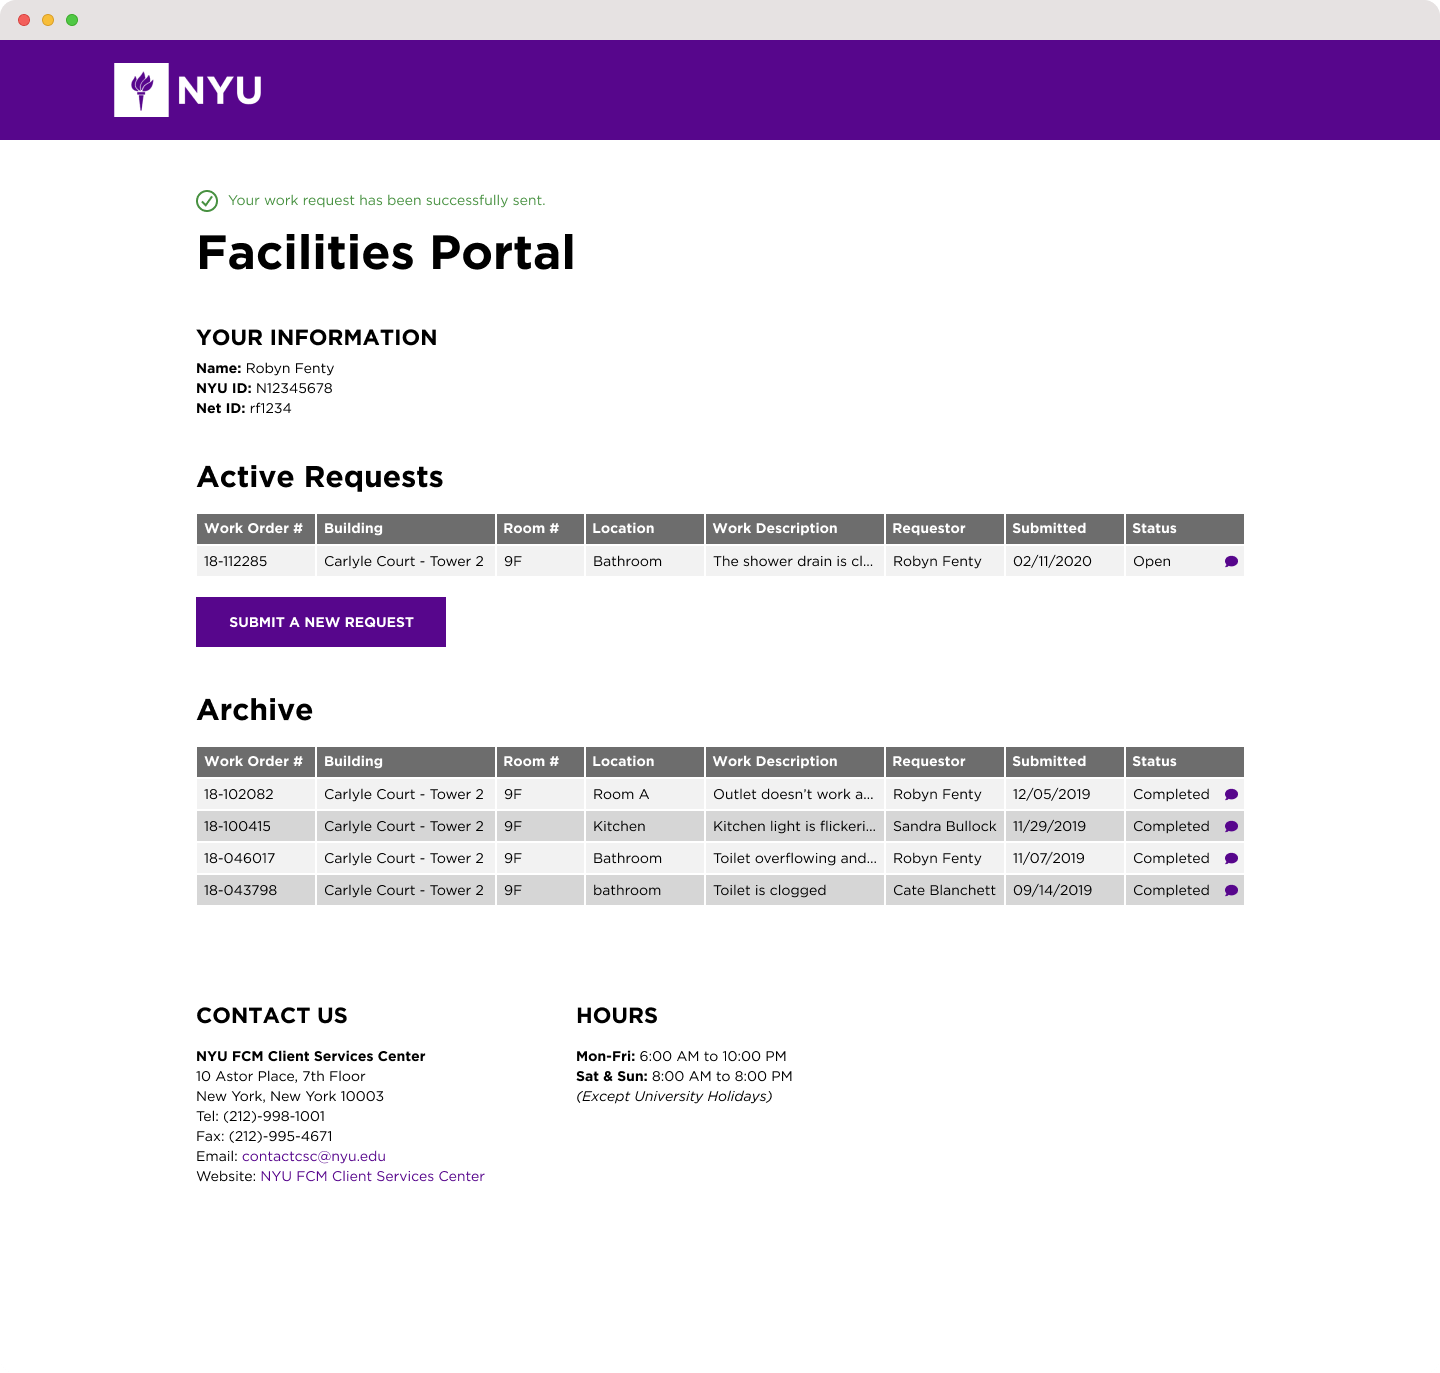 Web mockup of NYU Facilities Portal with an incomplete request